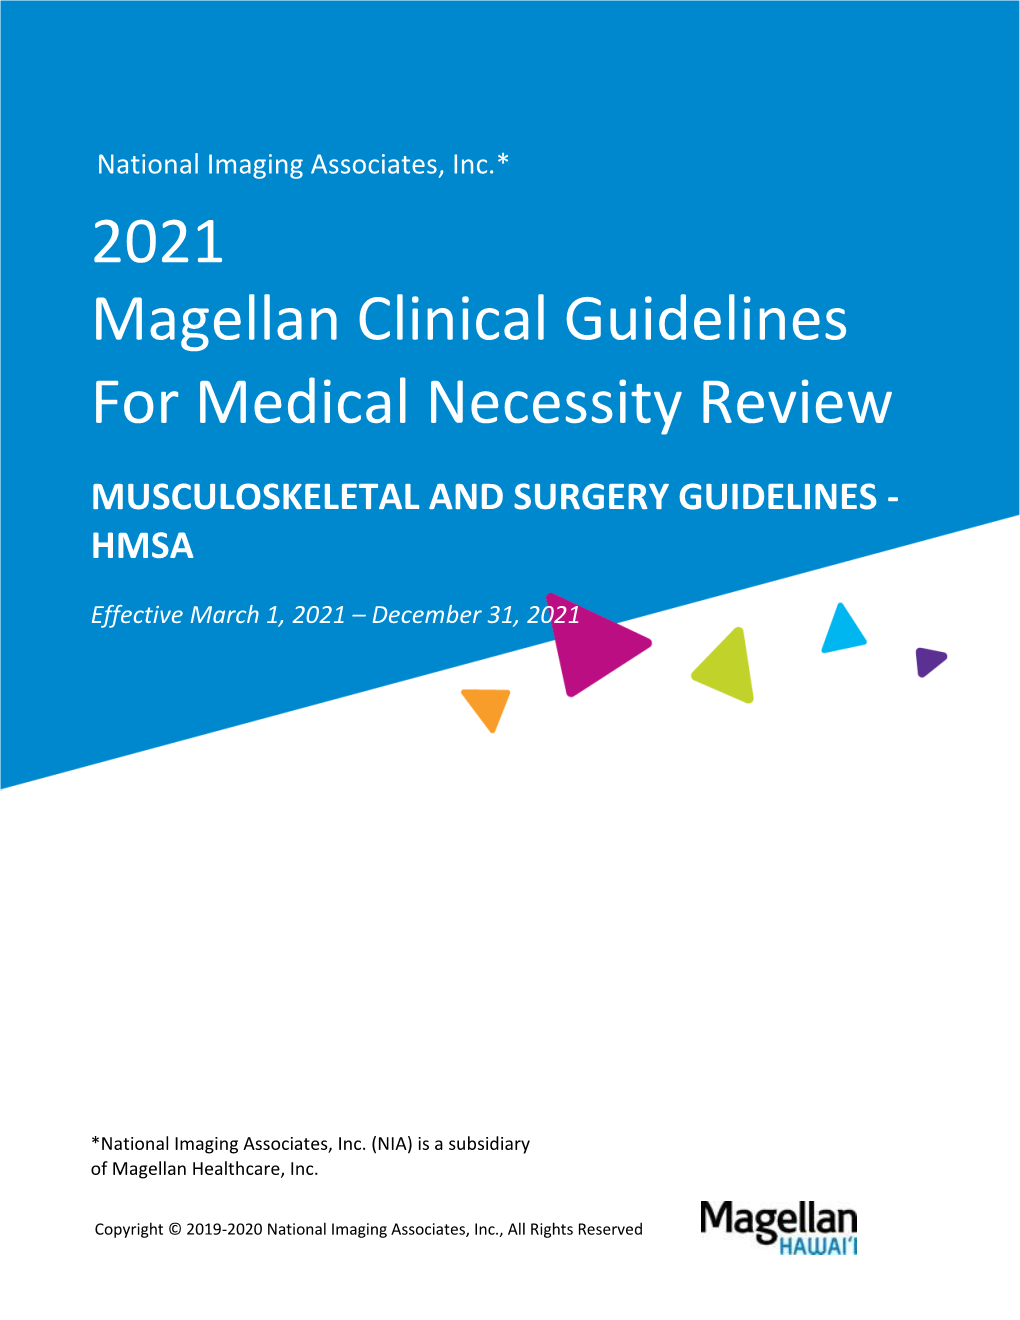 2021 Magellan Clinical Guidelines for Medical Necessity Review